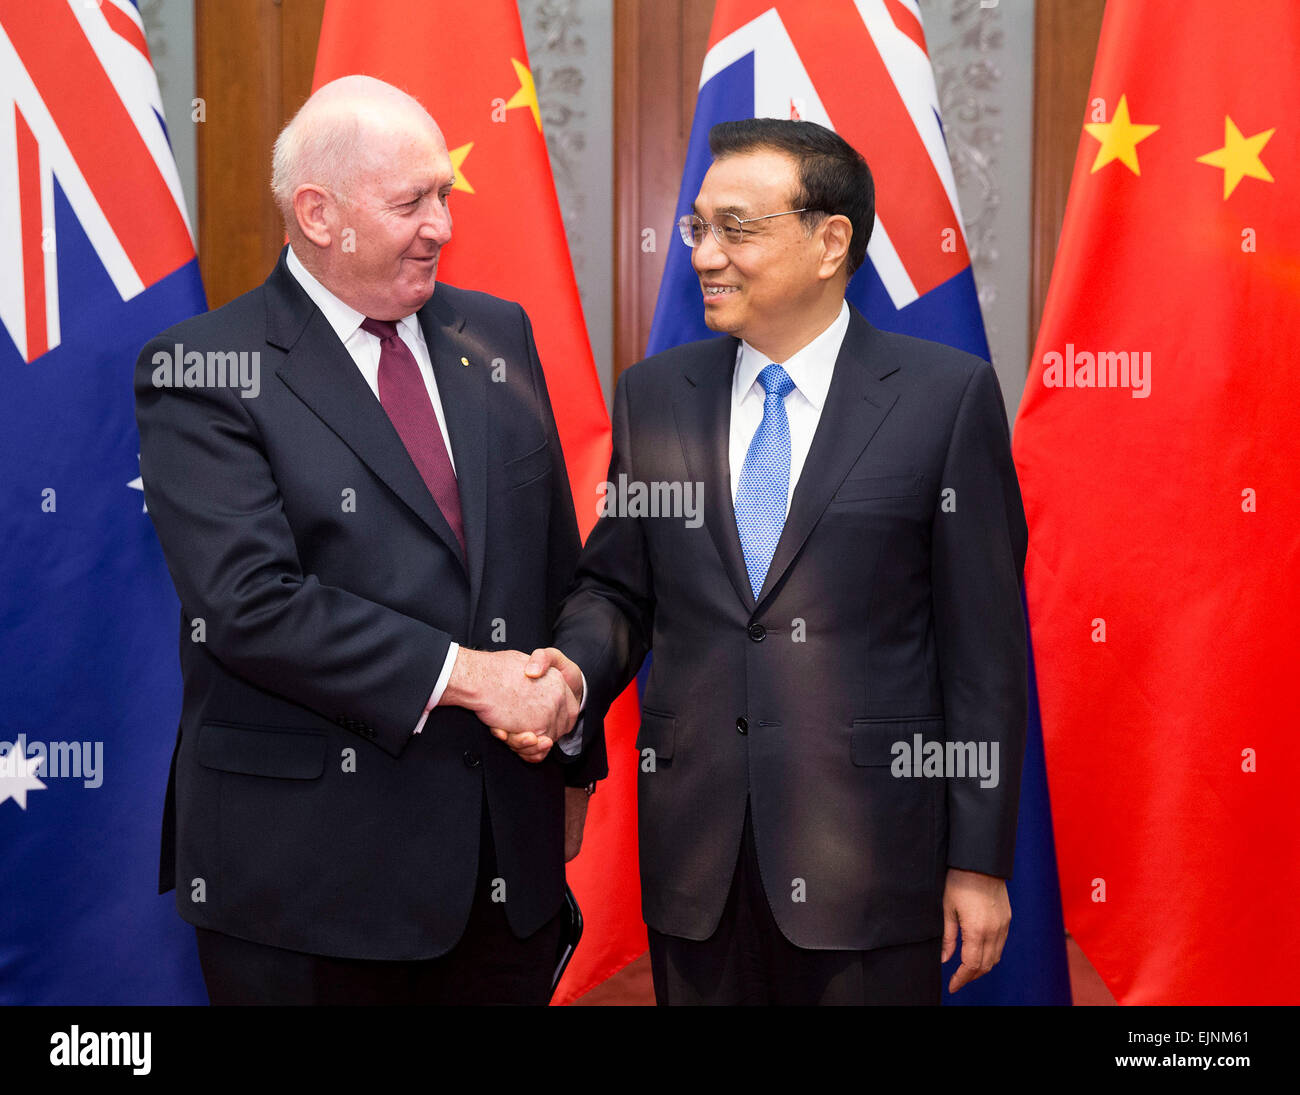 Beijing, China. 30th Mar, 2015. Chinese Premier Li Keqiang (R) meets with Australian Governor-General Peter Cosgrove at the Great Hall of the People in Beijing, capital of China, March 30, 2015. Credit:  Huang Jingwen/Xinhua/Alamy Live News Stock Photo